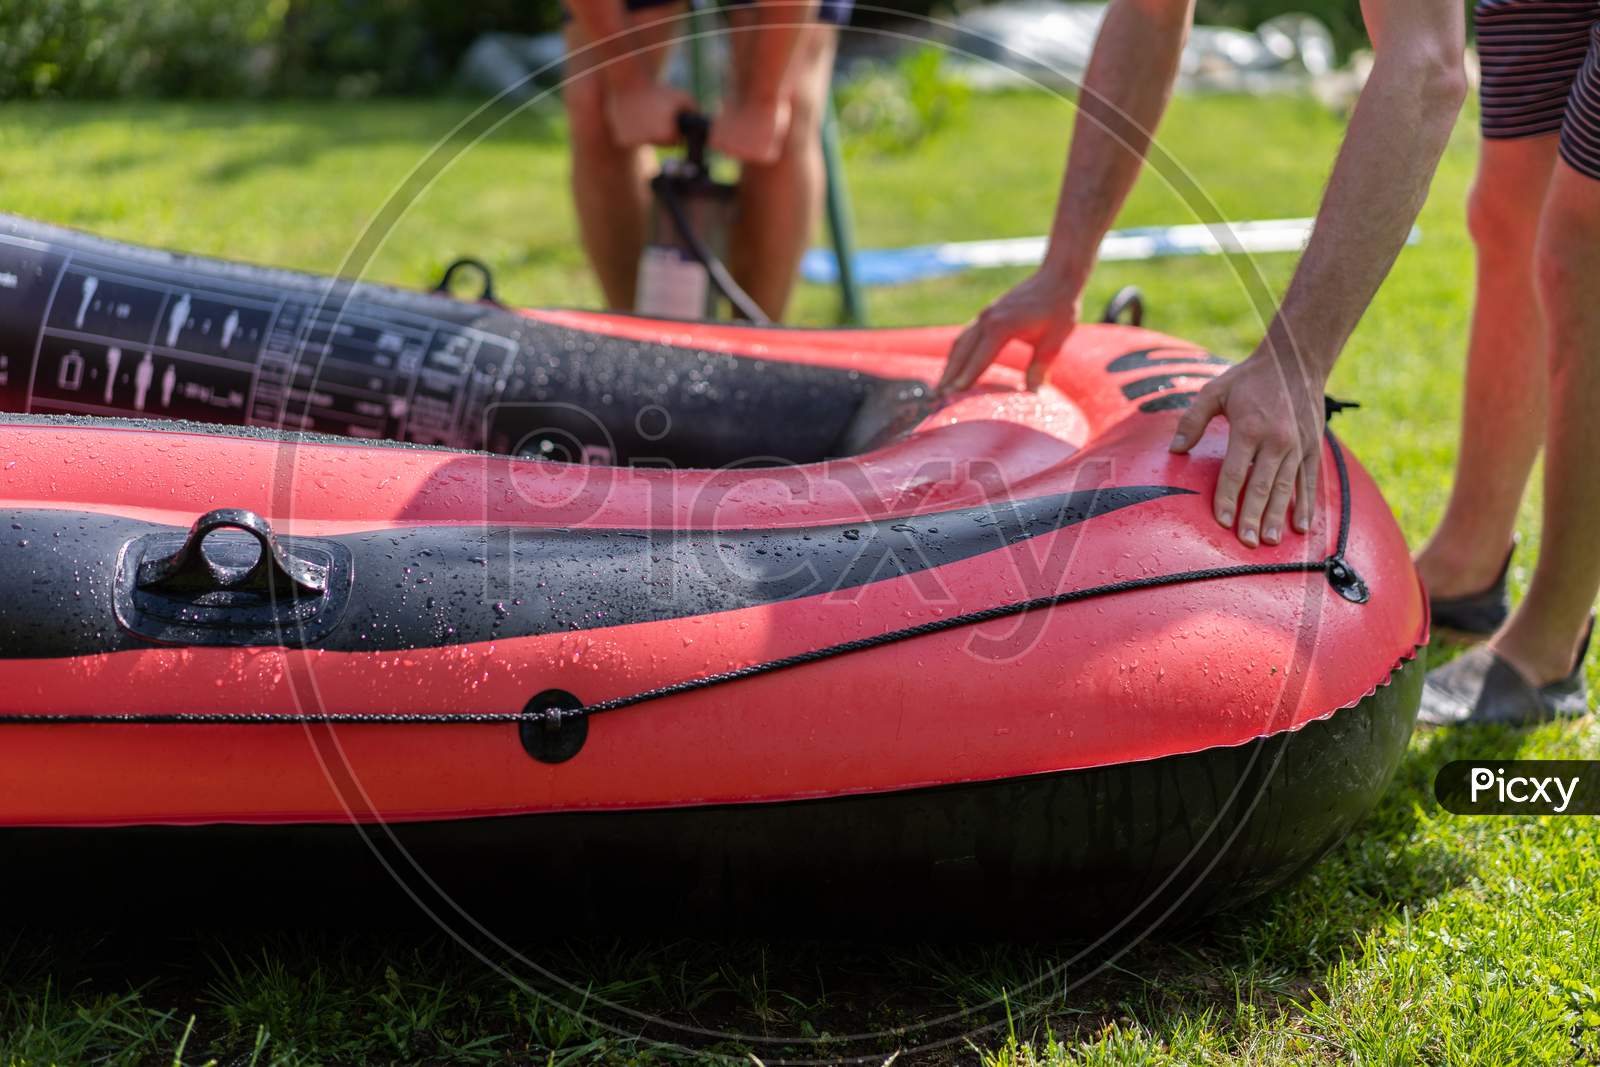 Close-Up Of Red Rubber Boat, Inflated With A Hand Pump And Checked By Two Young Men.